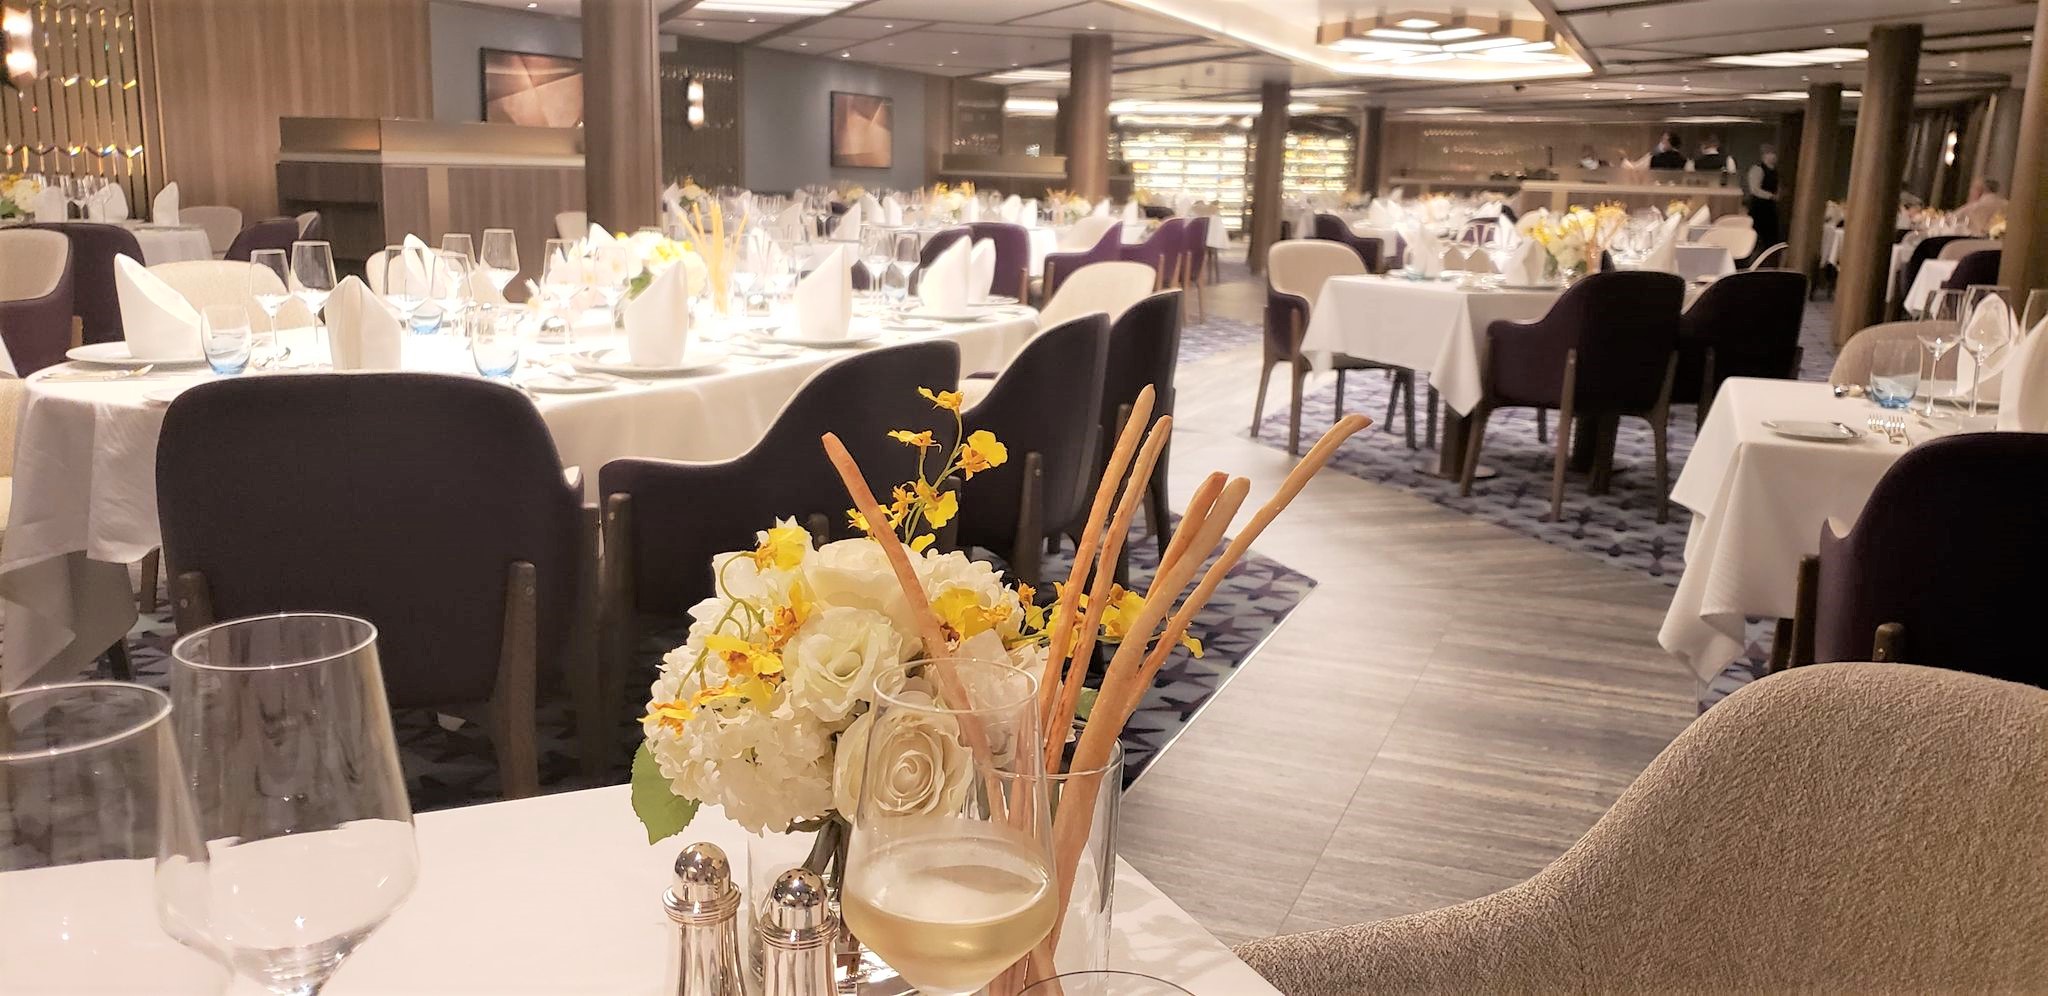 The elegant Restaurant on Seabourn Venture. Photo by Susan J. Young